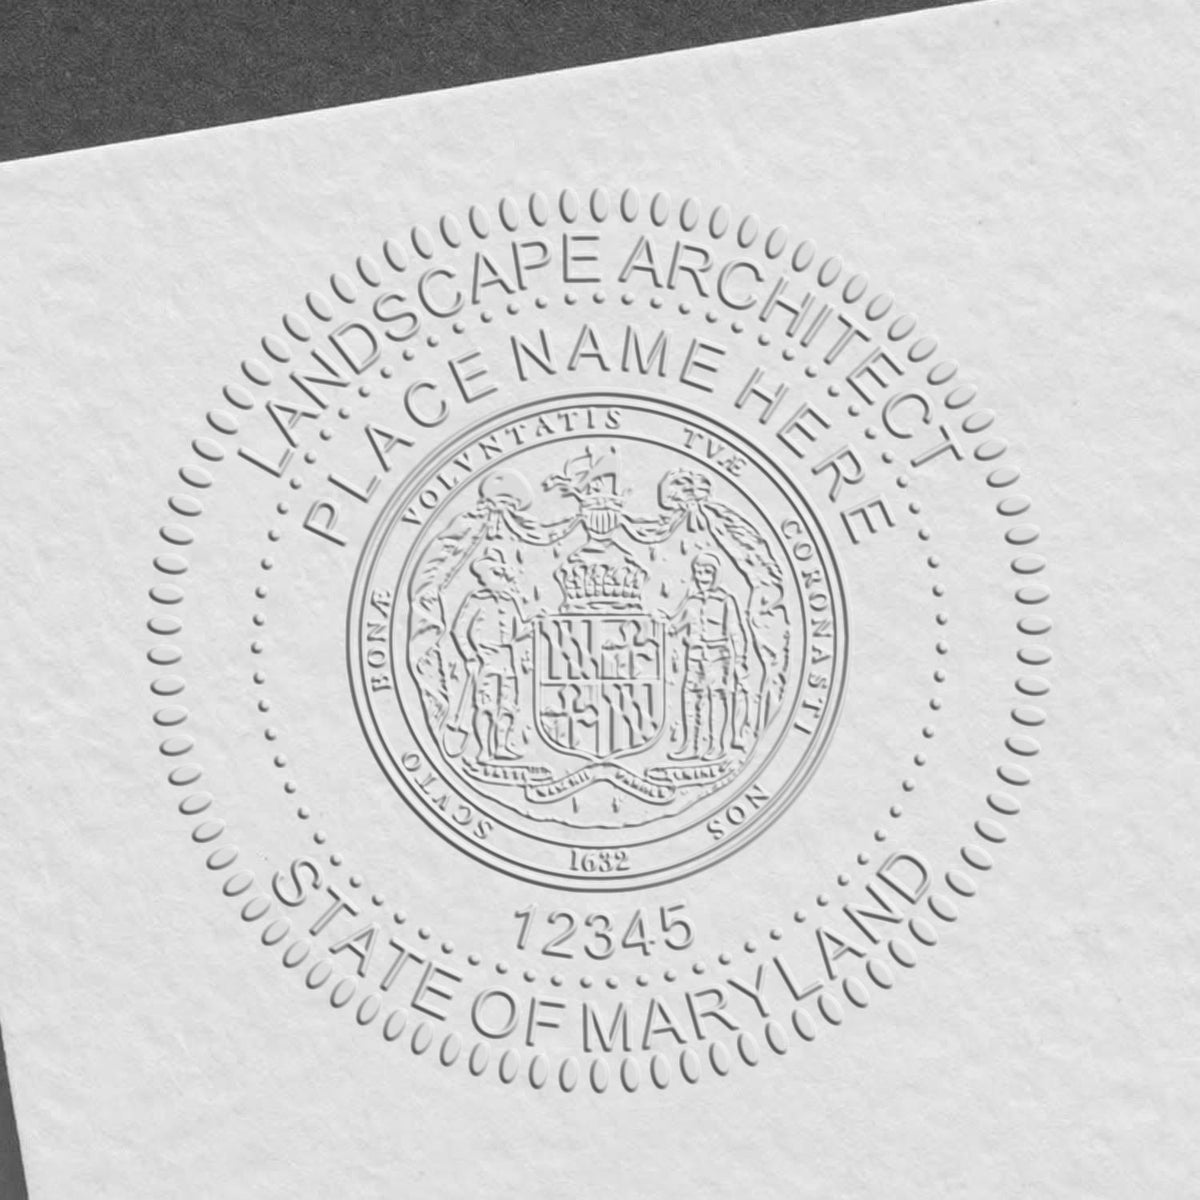 The Gift Maryland Landscape Architect Seal stamp impression comes to life with a crisp, detailed image stamped on paper - showcasing true professional quality.